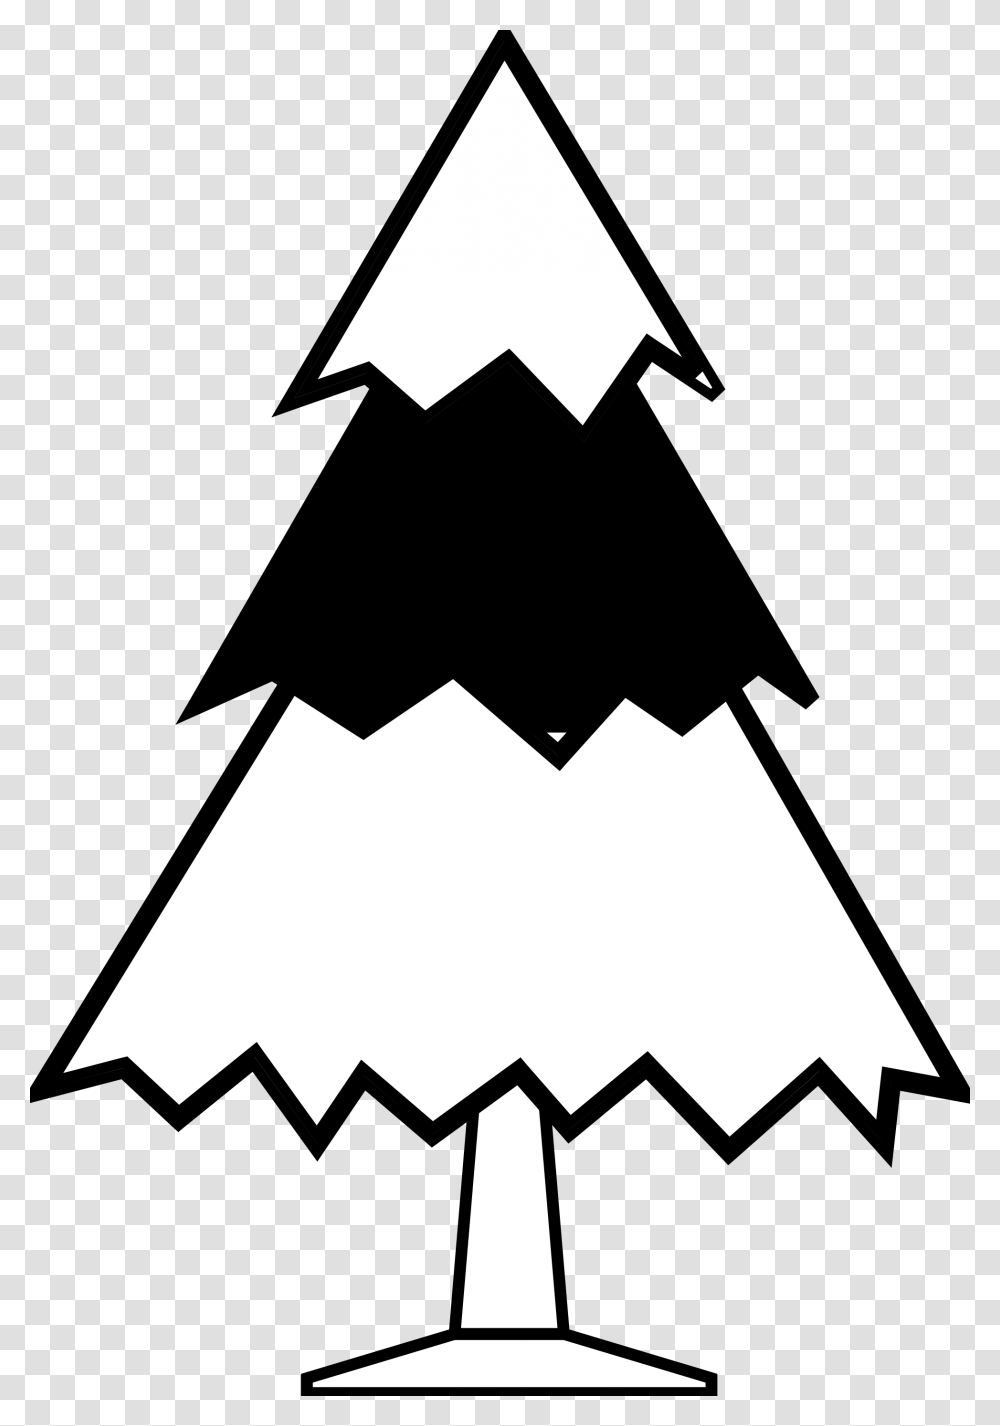 Free Christmas Tree Line Drawing Download Free Clip Art Free Clip, Cross, Plant, Star Symbol Transparent Png